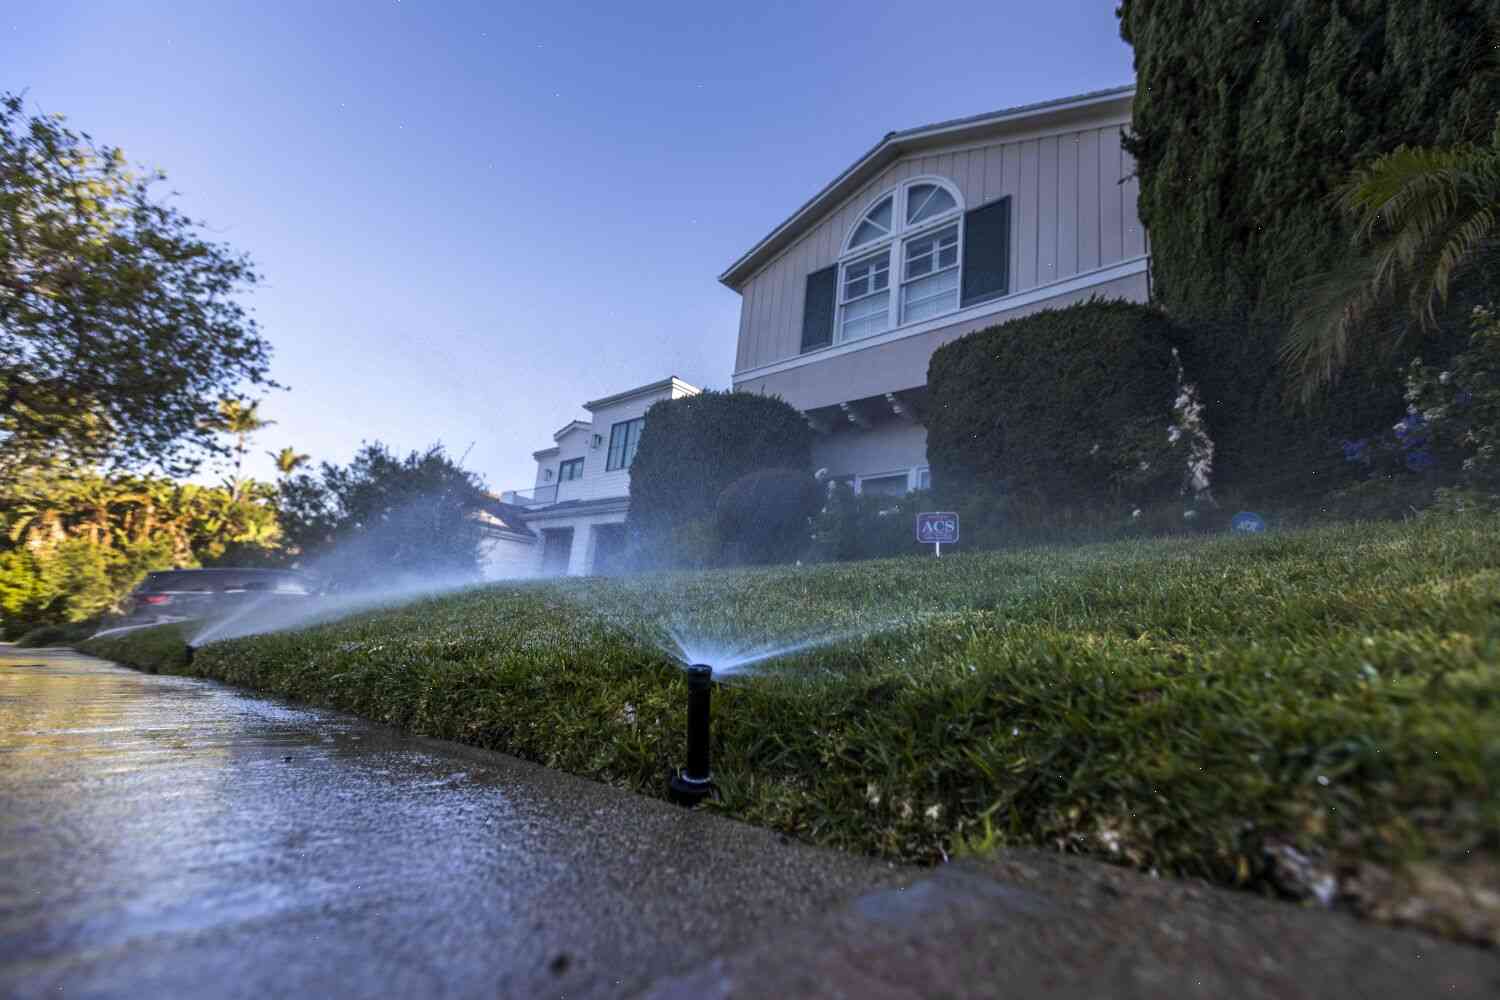 The Santa Monica Water District is running dry and running low on water